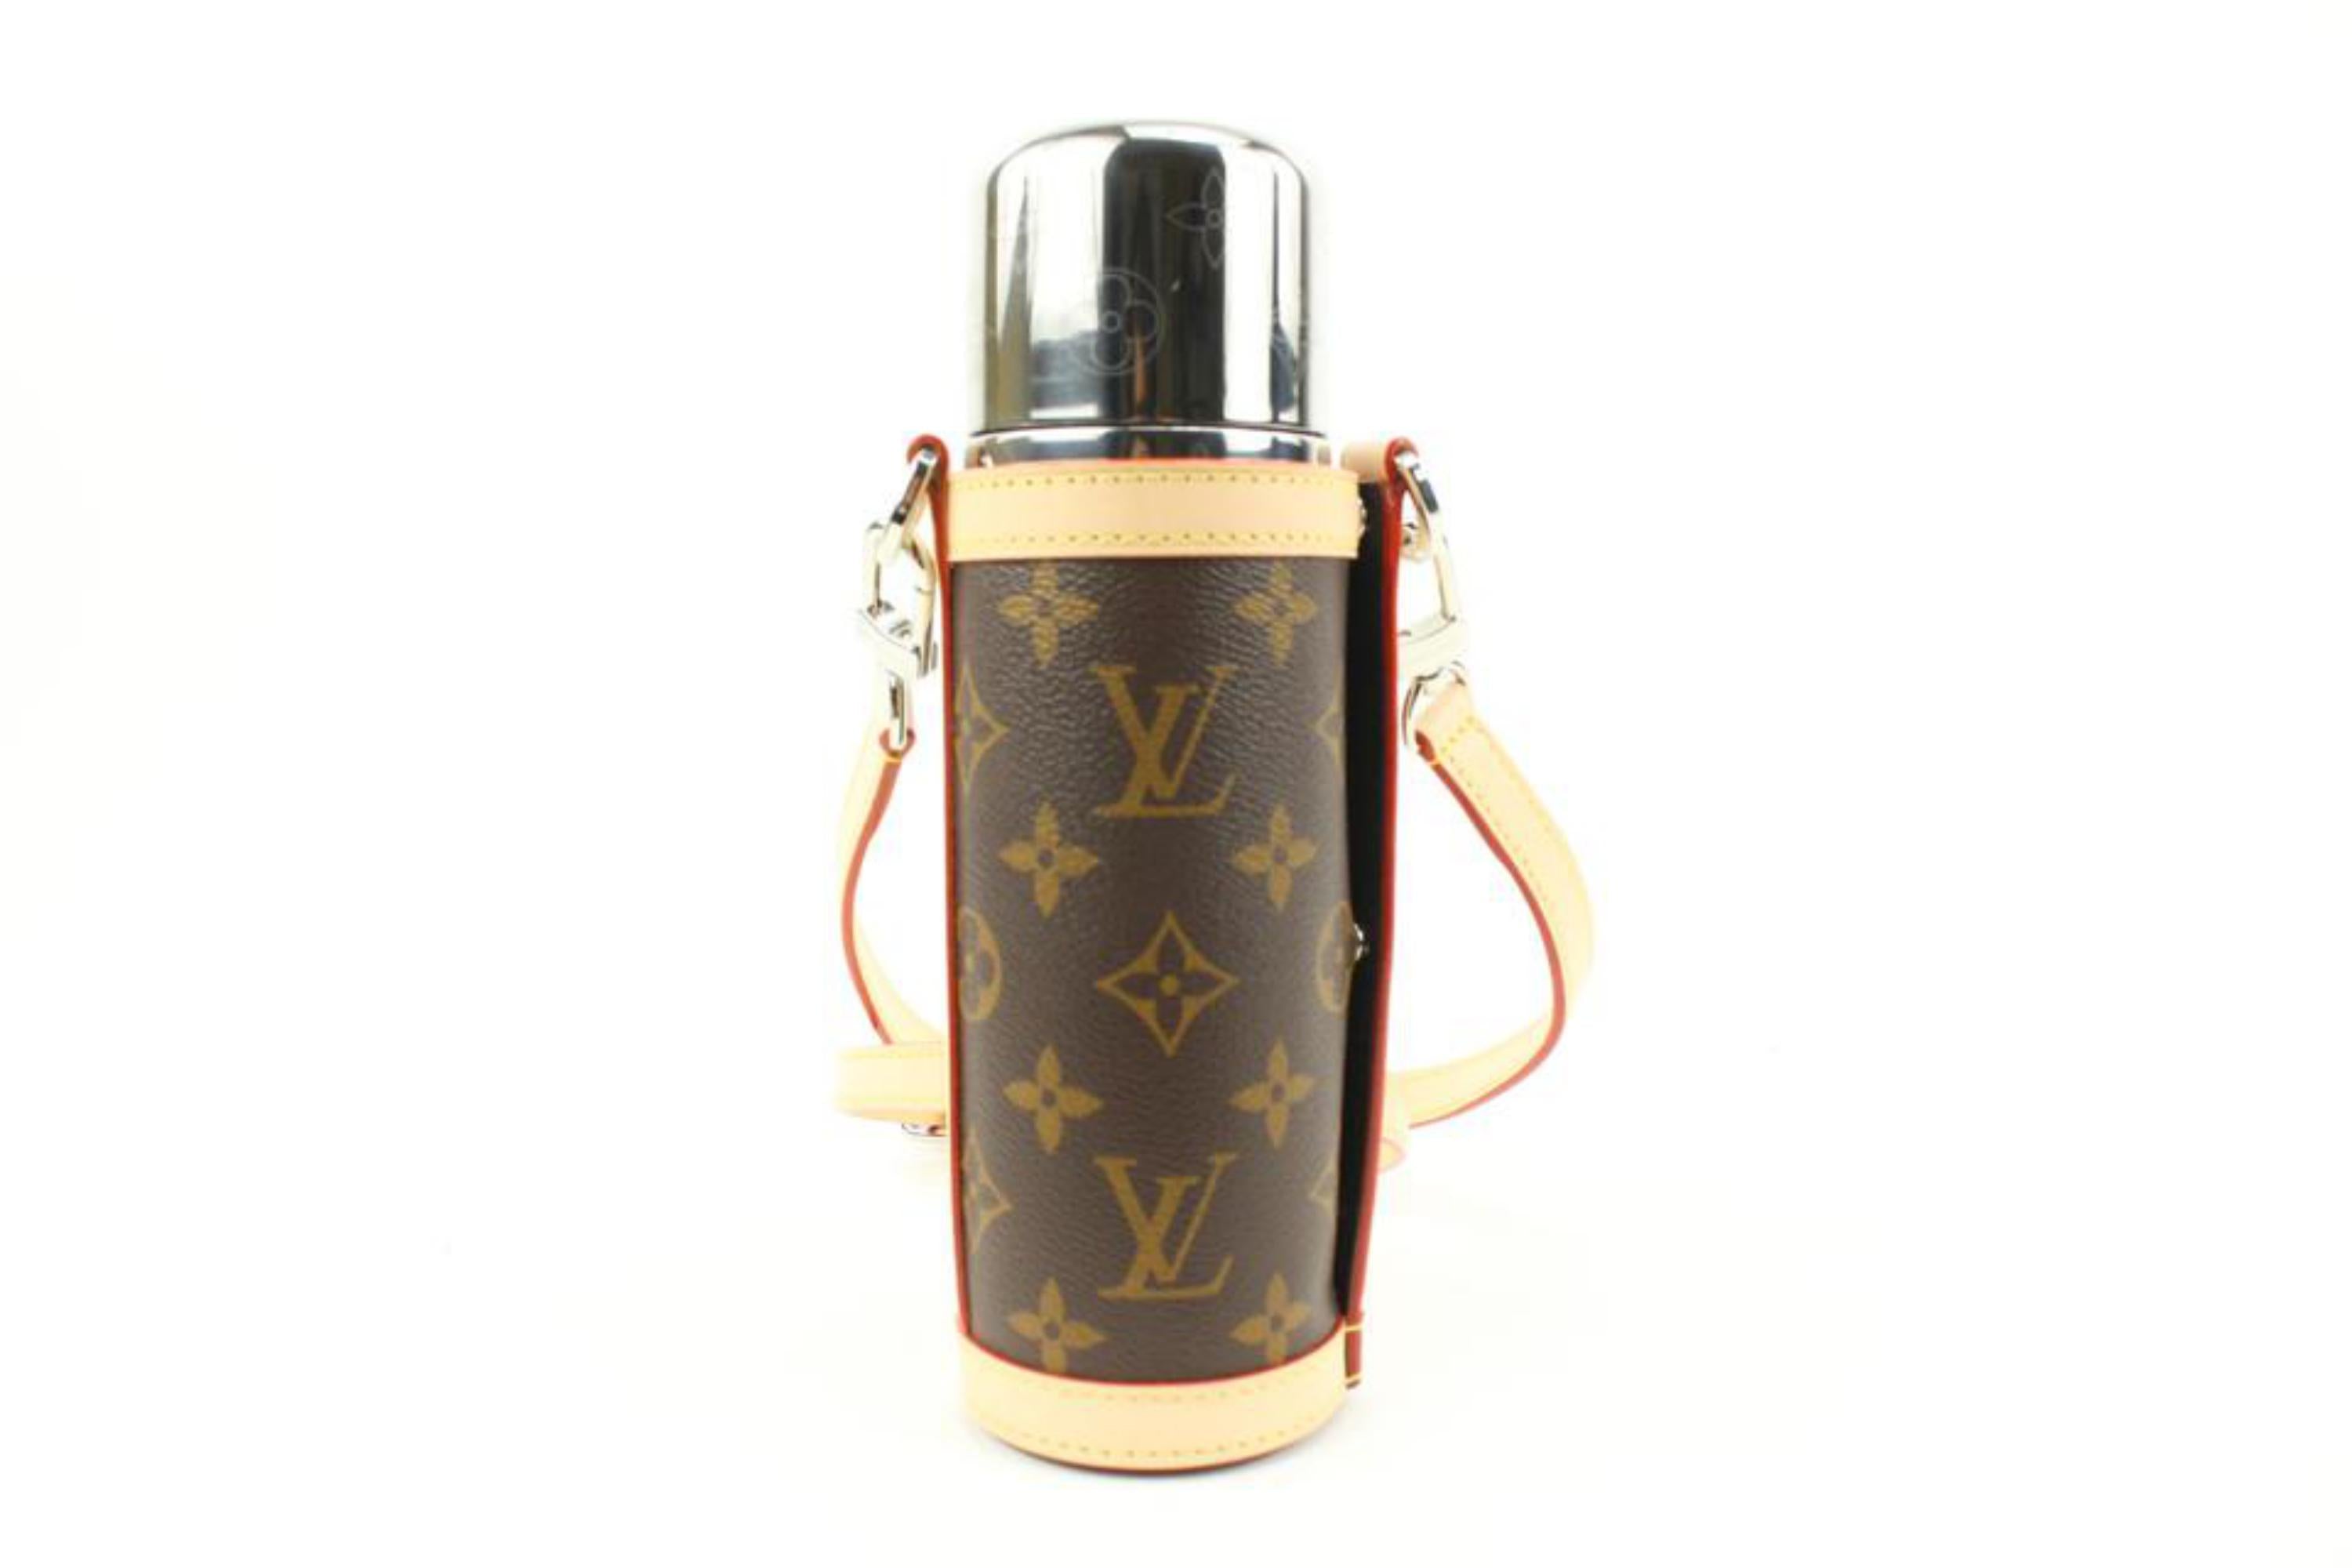 Other, Digital Genuine Louisvuitton Thermos Cold Hot